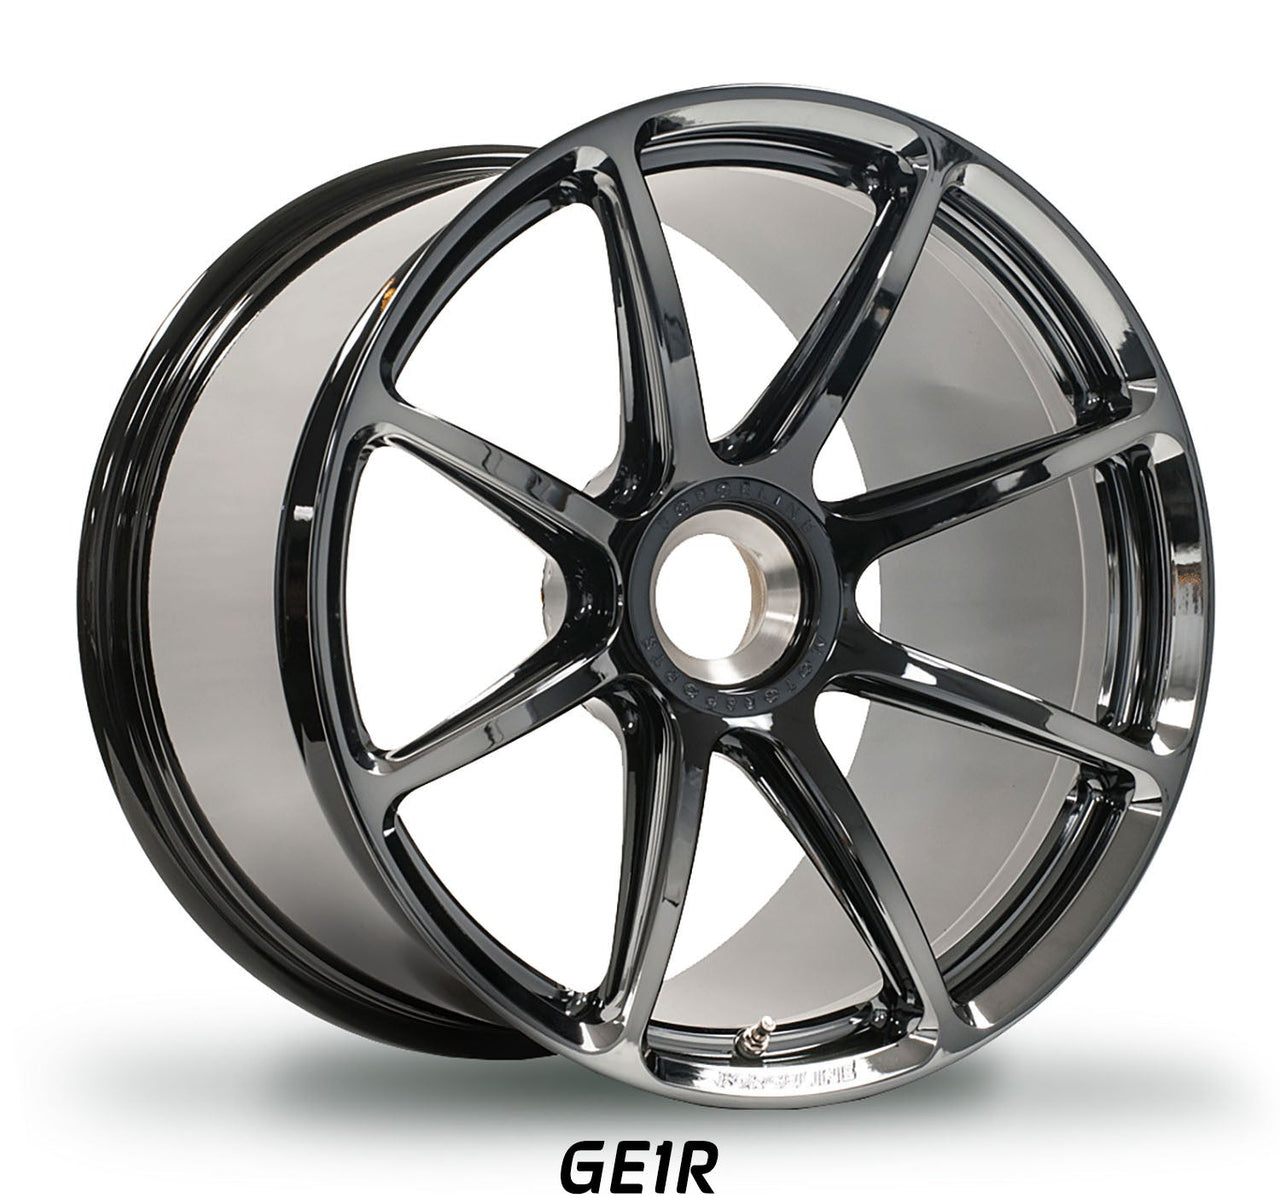 Forgeline GE1R center lock for Porsche 991 GT3 best forged wheels for racing and HPDE